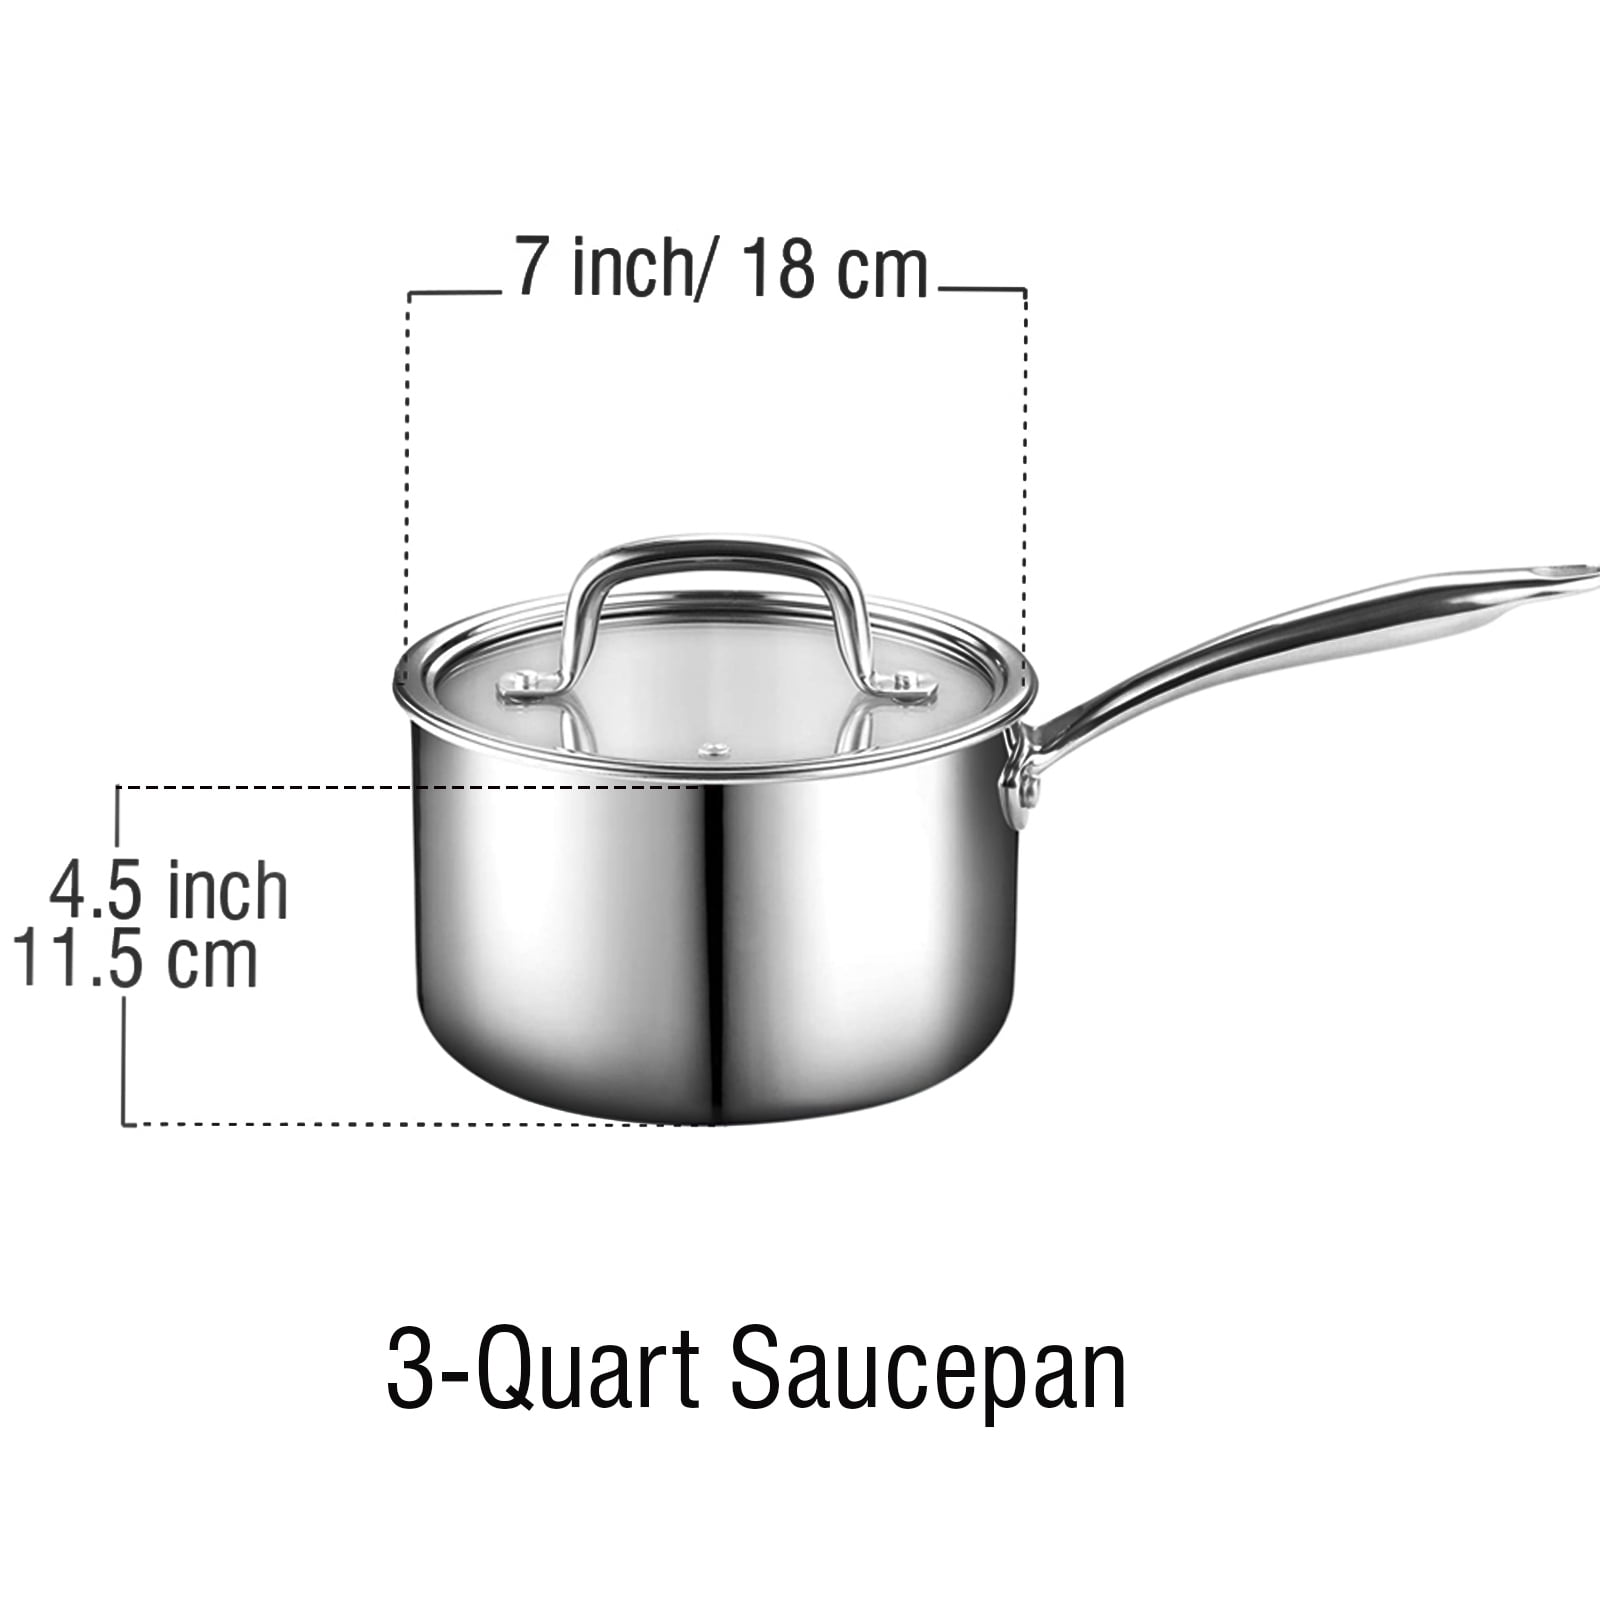 Set of 3 stainless steel sauce pans with removable handle - Silver –  Qulinart